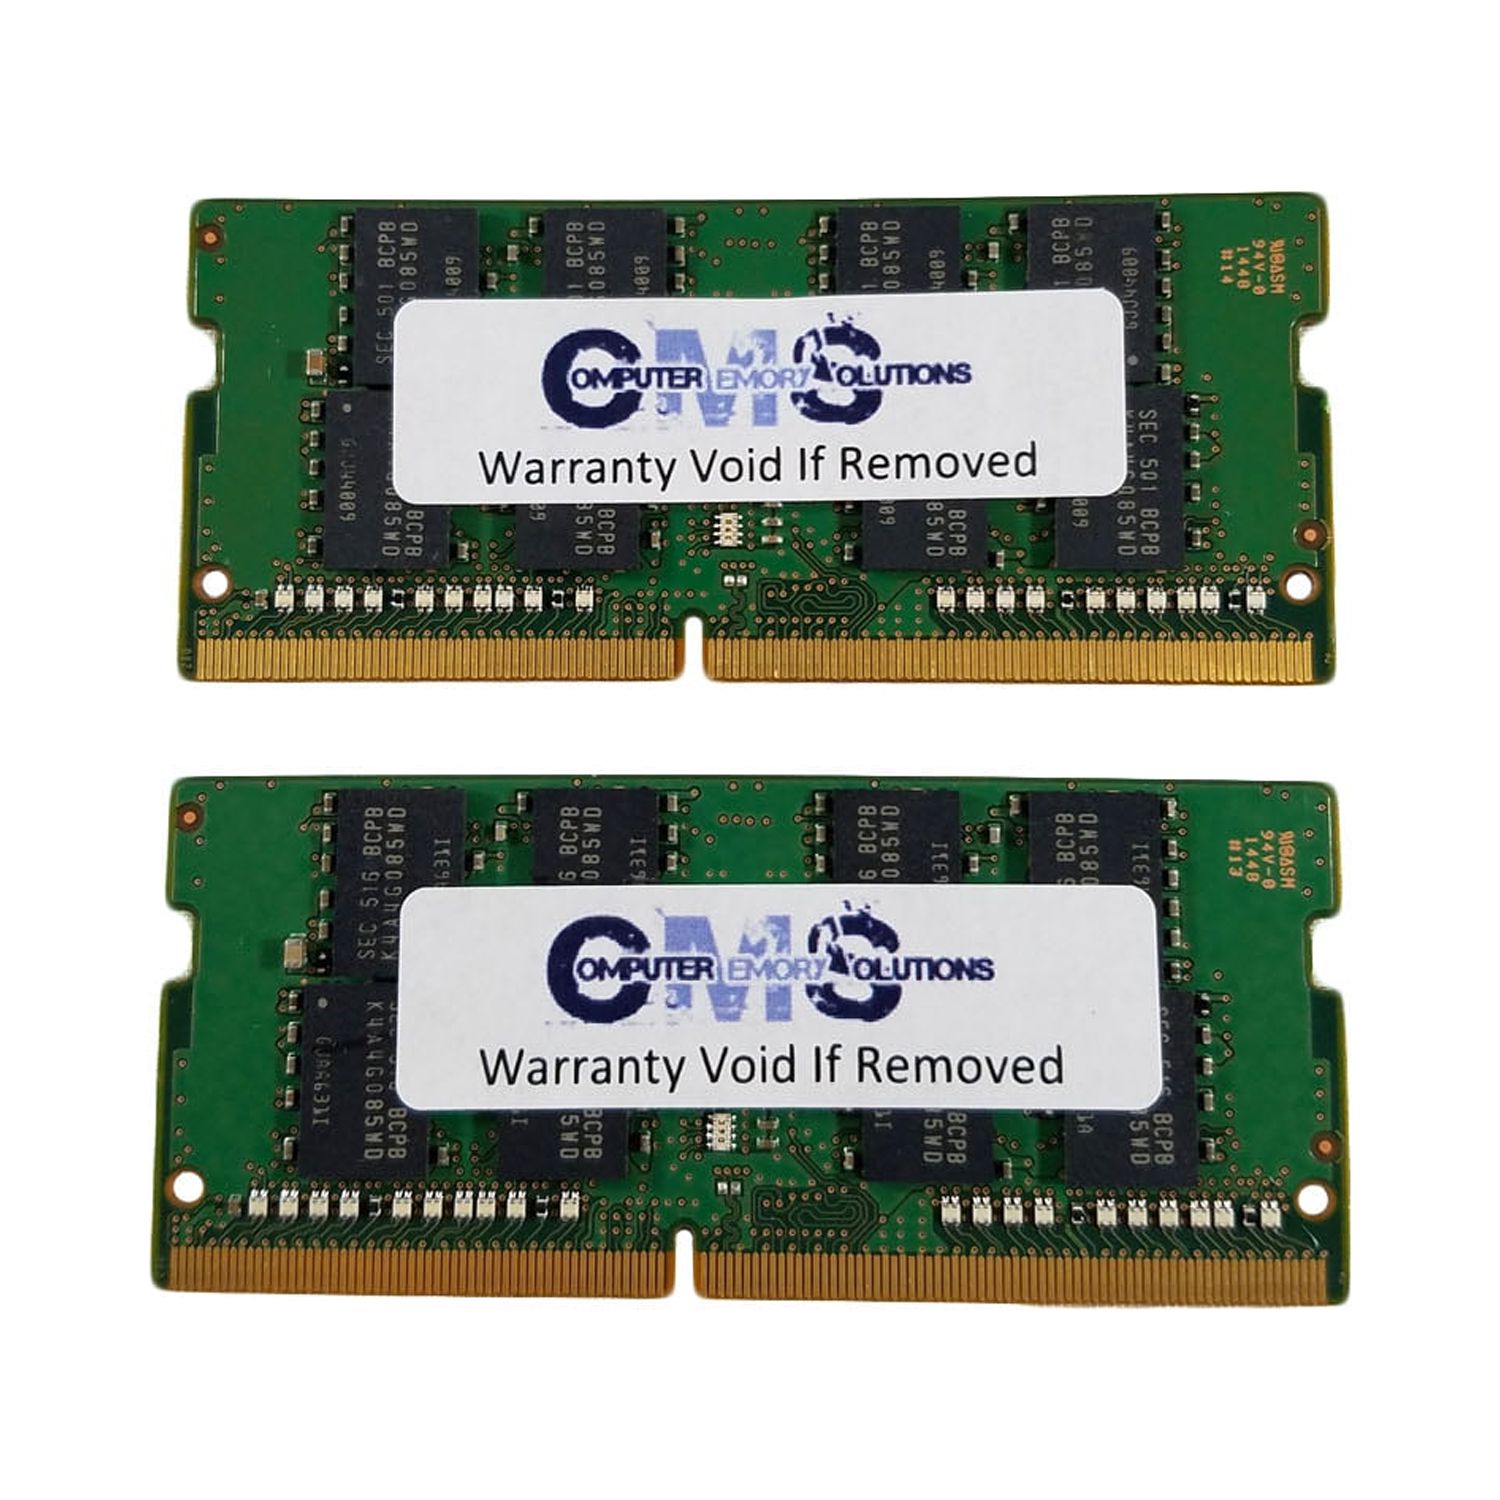 CMS 32GB (2X16GB) DDR4 19200 2400MHZ NON ECC SODIMM Memory Ram Upgrade Compatible with Gigabyte® Mini STX System BRIX GB-BSi5HAC-6300, GB-BSi5HAL-6200, GB-BSi7HA-6500, GB-BSi7HA-6600 - C108 - image 1 of 2